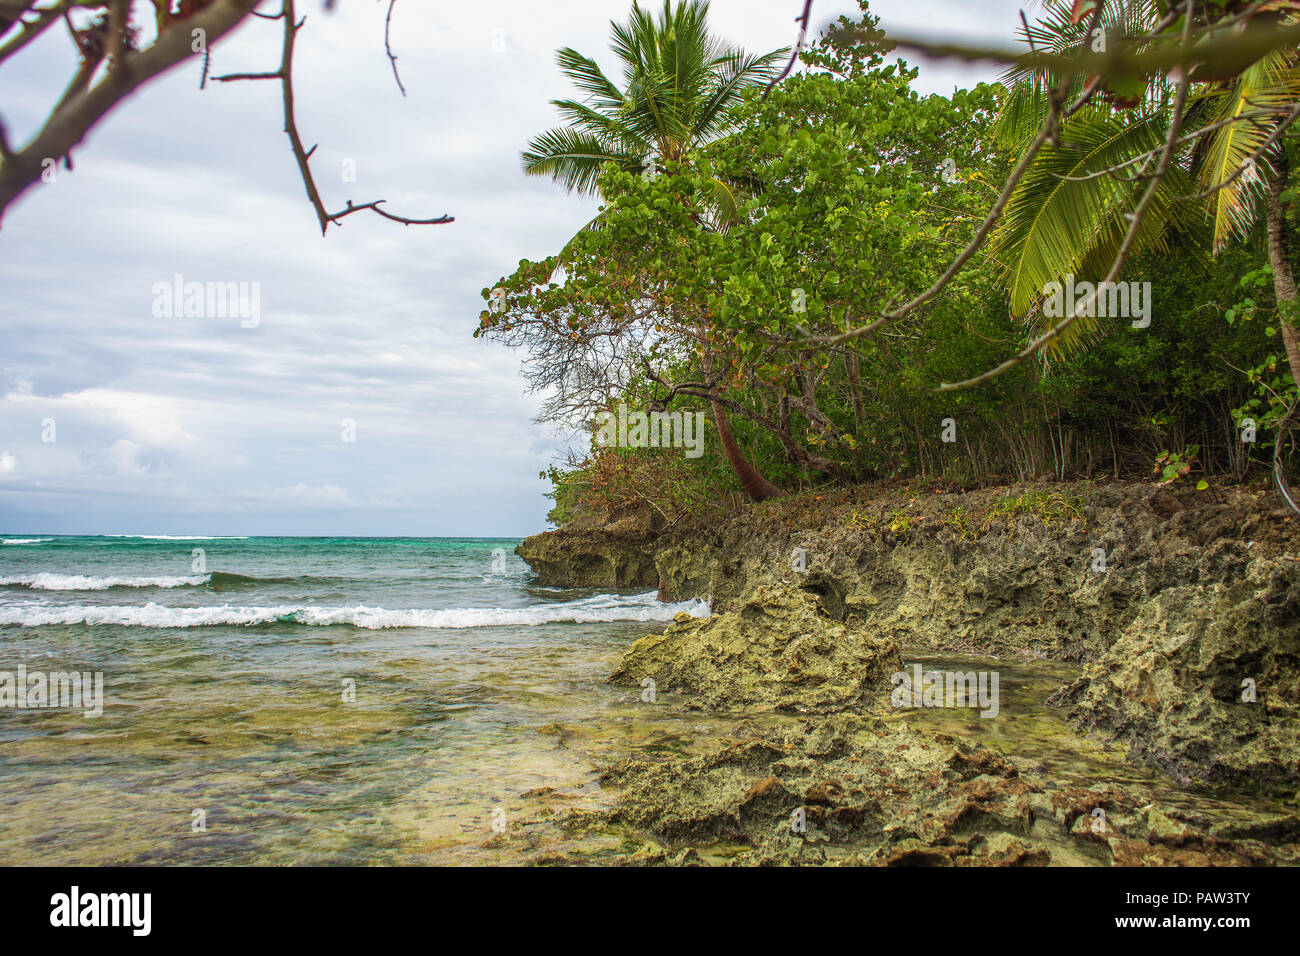 Wild tropical shore. South landscape: ocean, palm trees, sky with white clouds. Samana, Dominican Republic Stock Photo